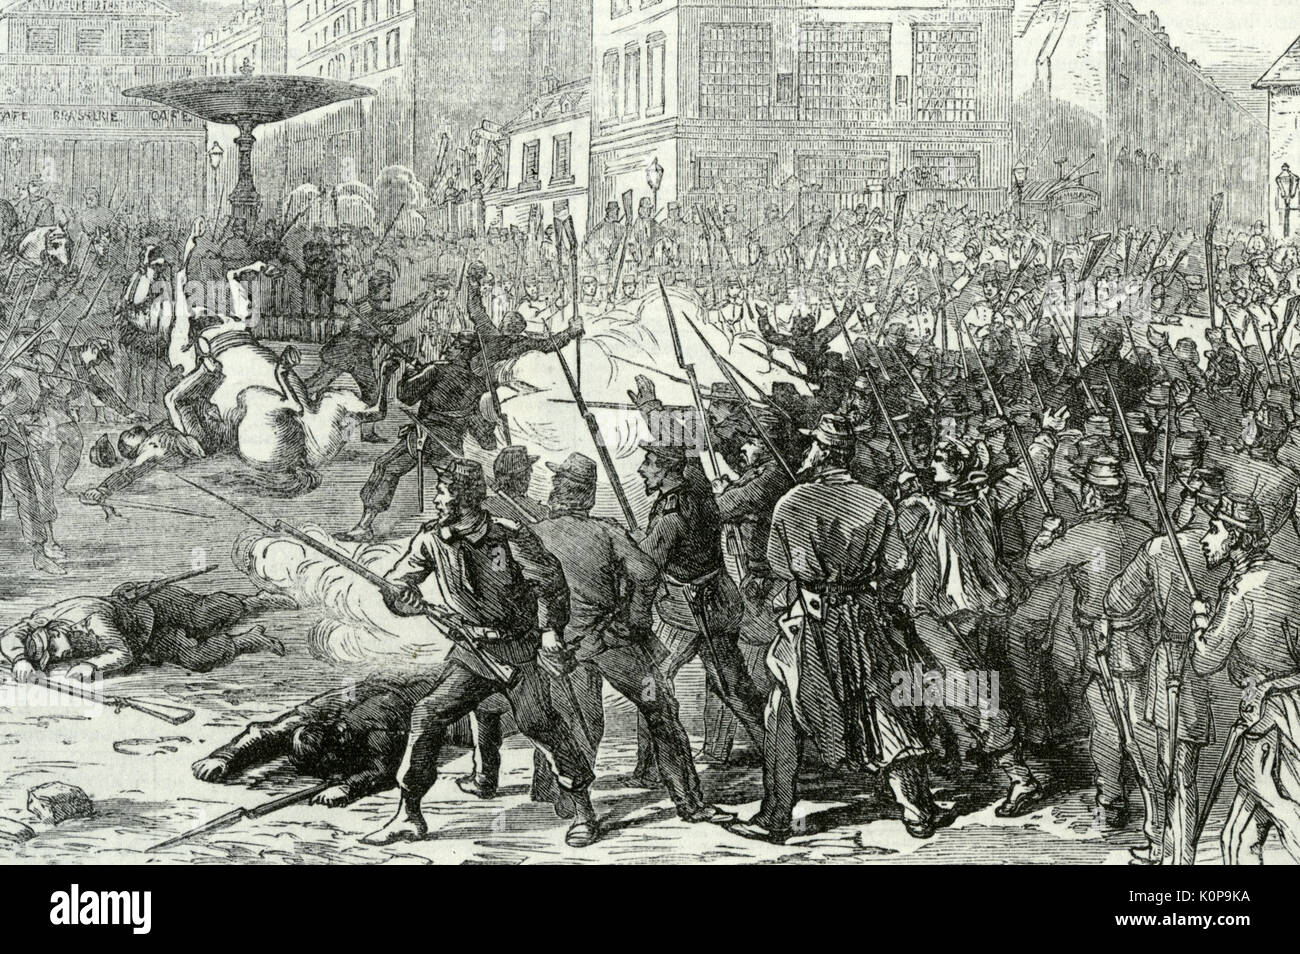 PARIS COMMUNE March-May 1871. Fighting at the Place Pigalle near Sacre Coeur during Bloody Week May 21-22 Stock Photo